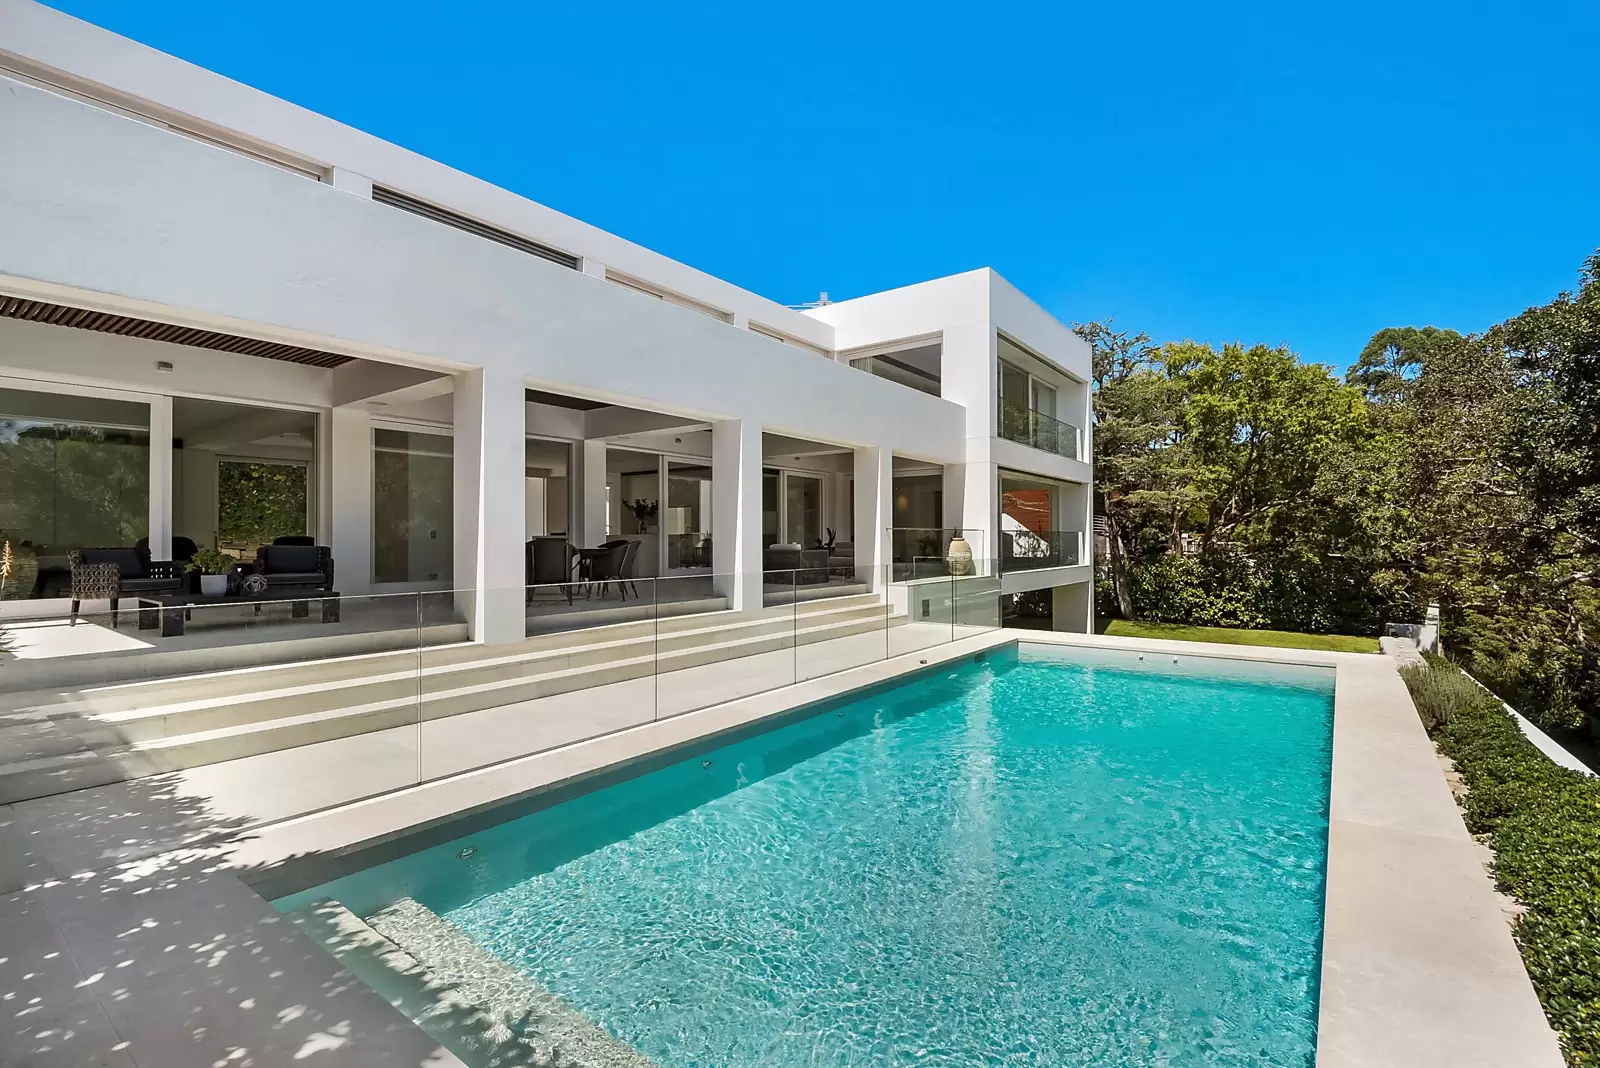 Photo #4: 10 The Crescent, Vaucluse - Sold by Sydney Sotheby's International Realty